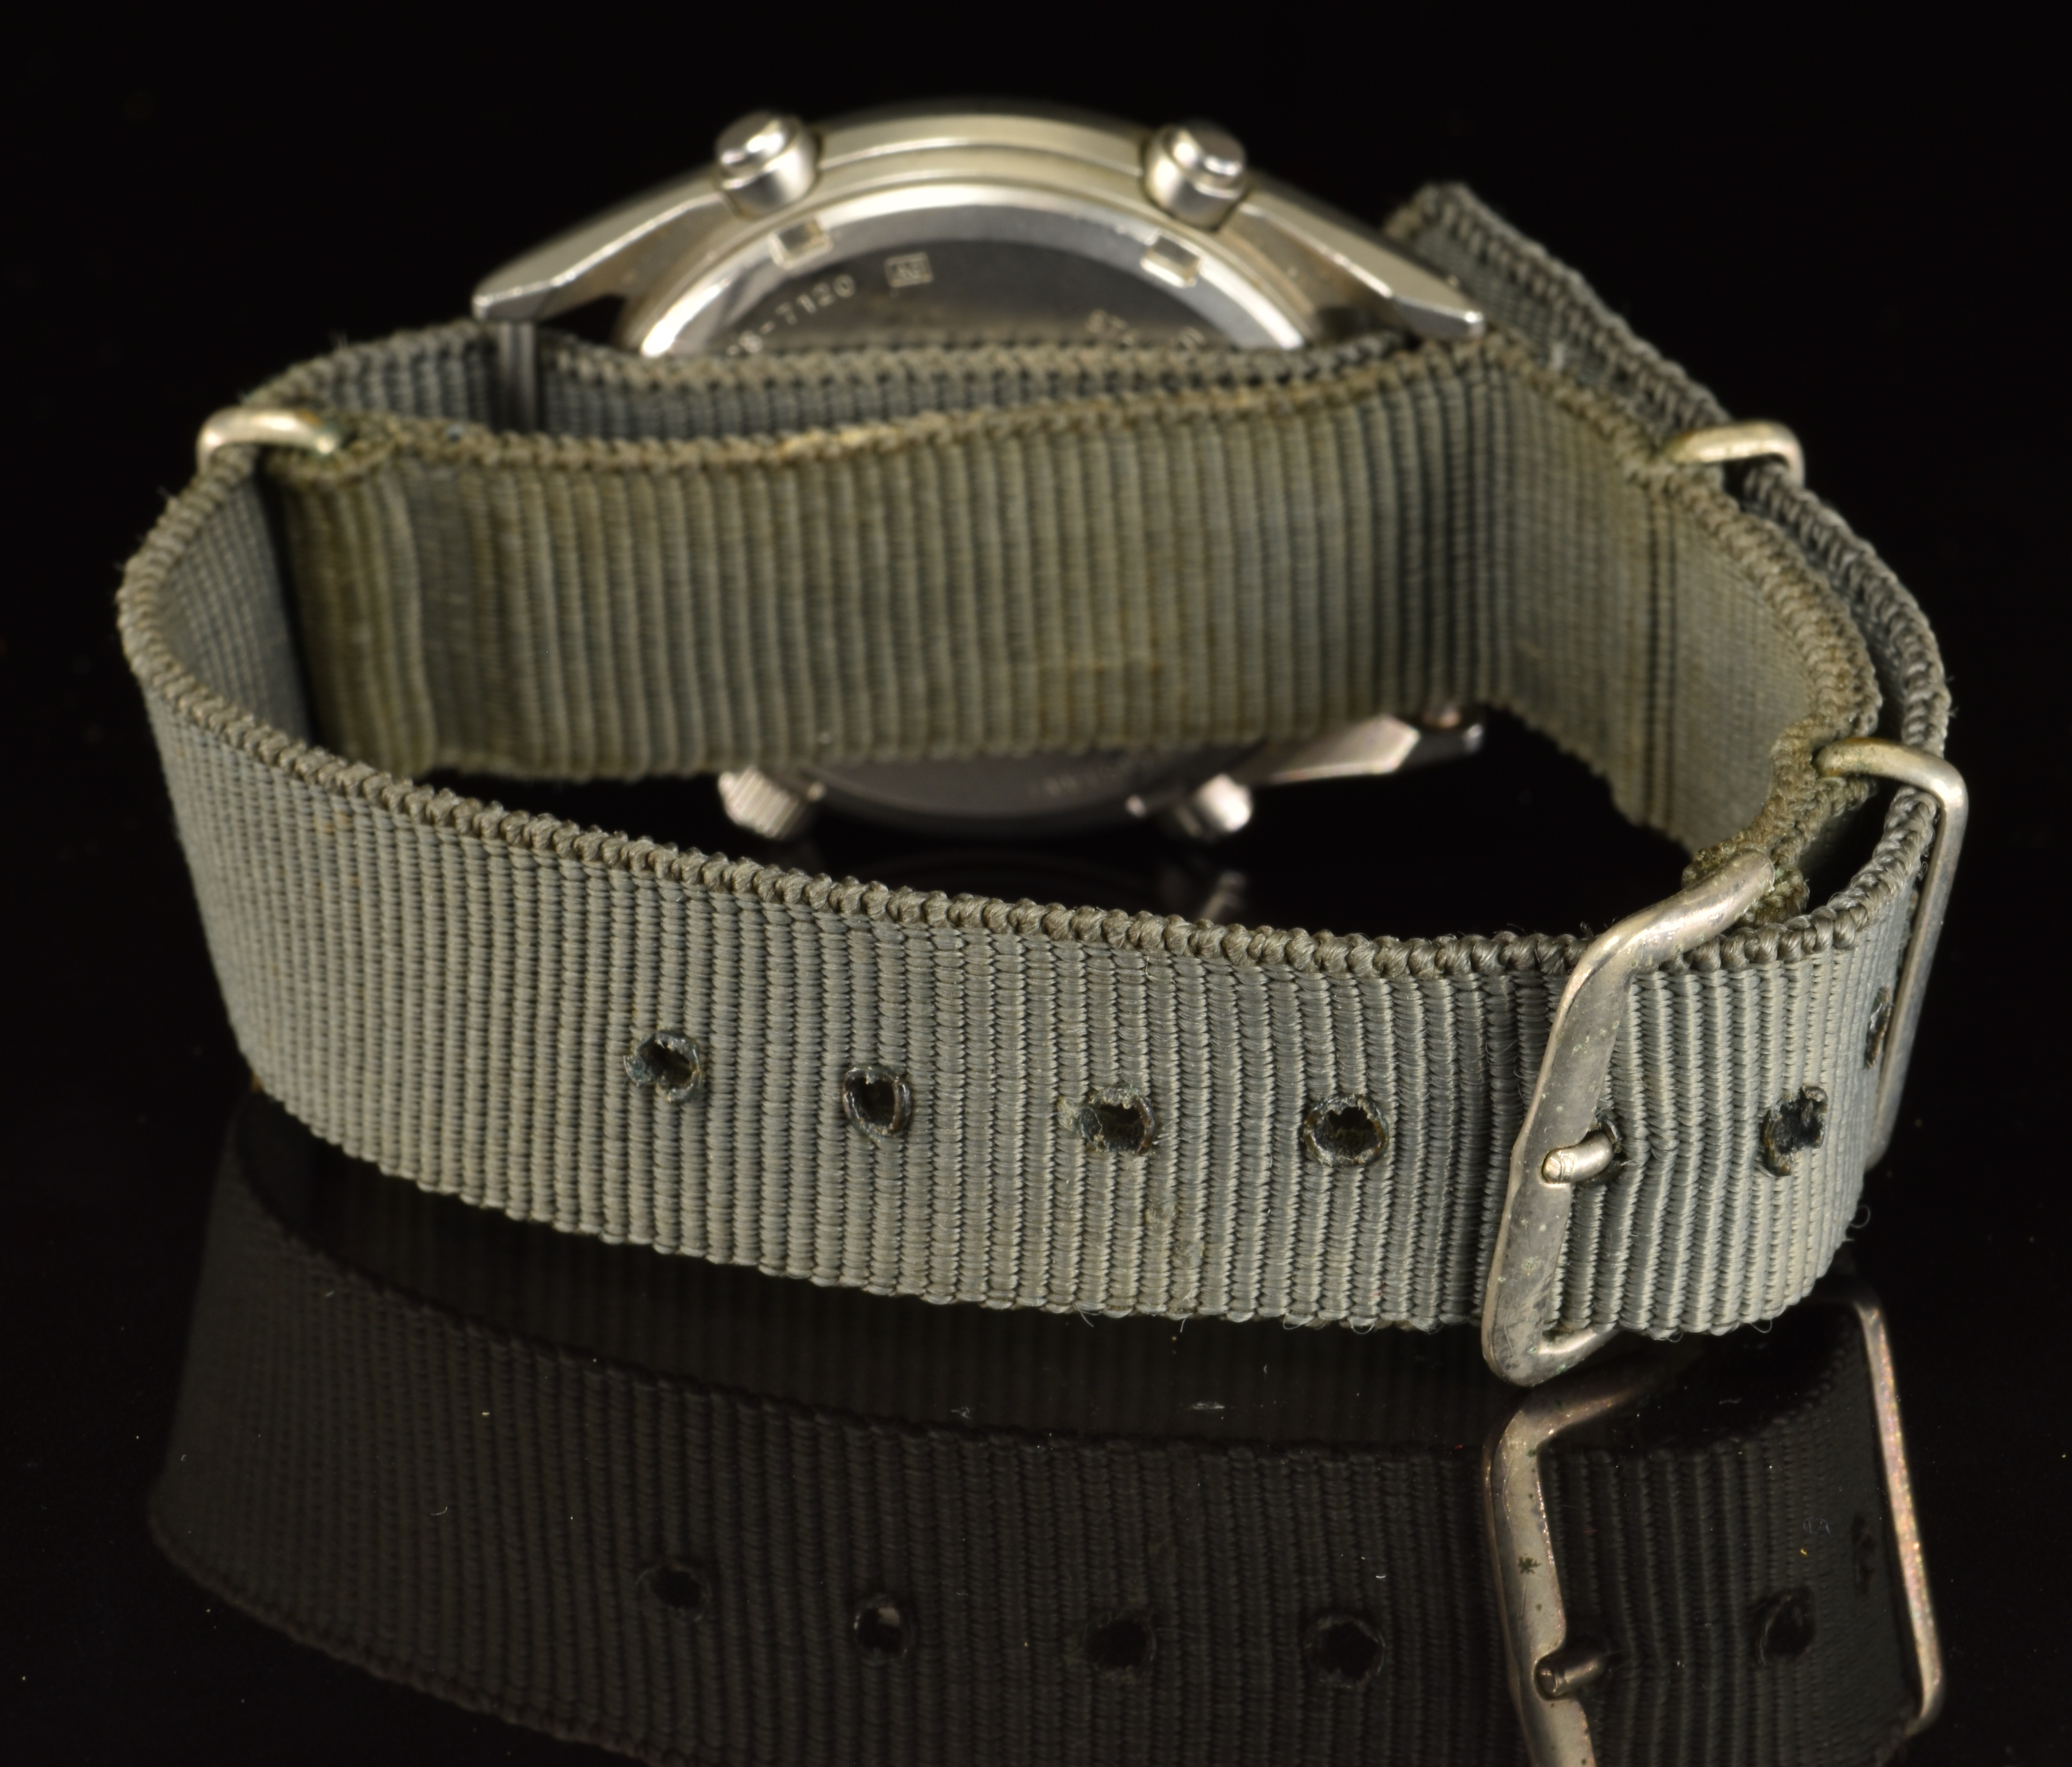 Seiko gentleman's military issue wristwatch ref. 7N32-0BC0 with luminous hands and hour markers, - Image 3 of 4